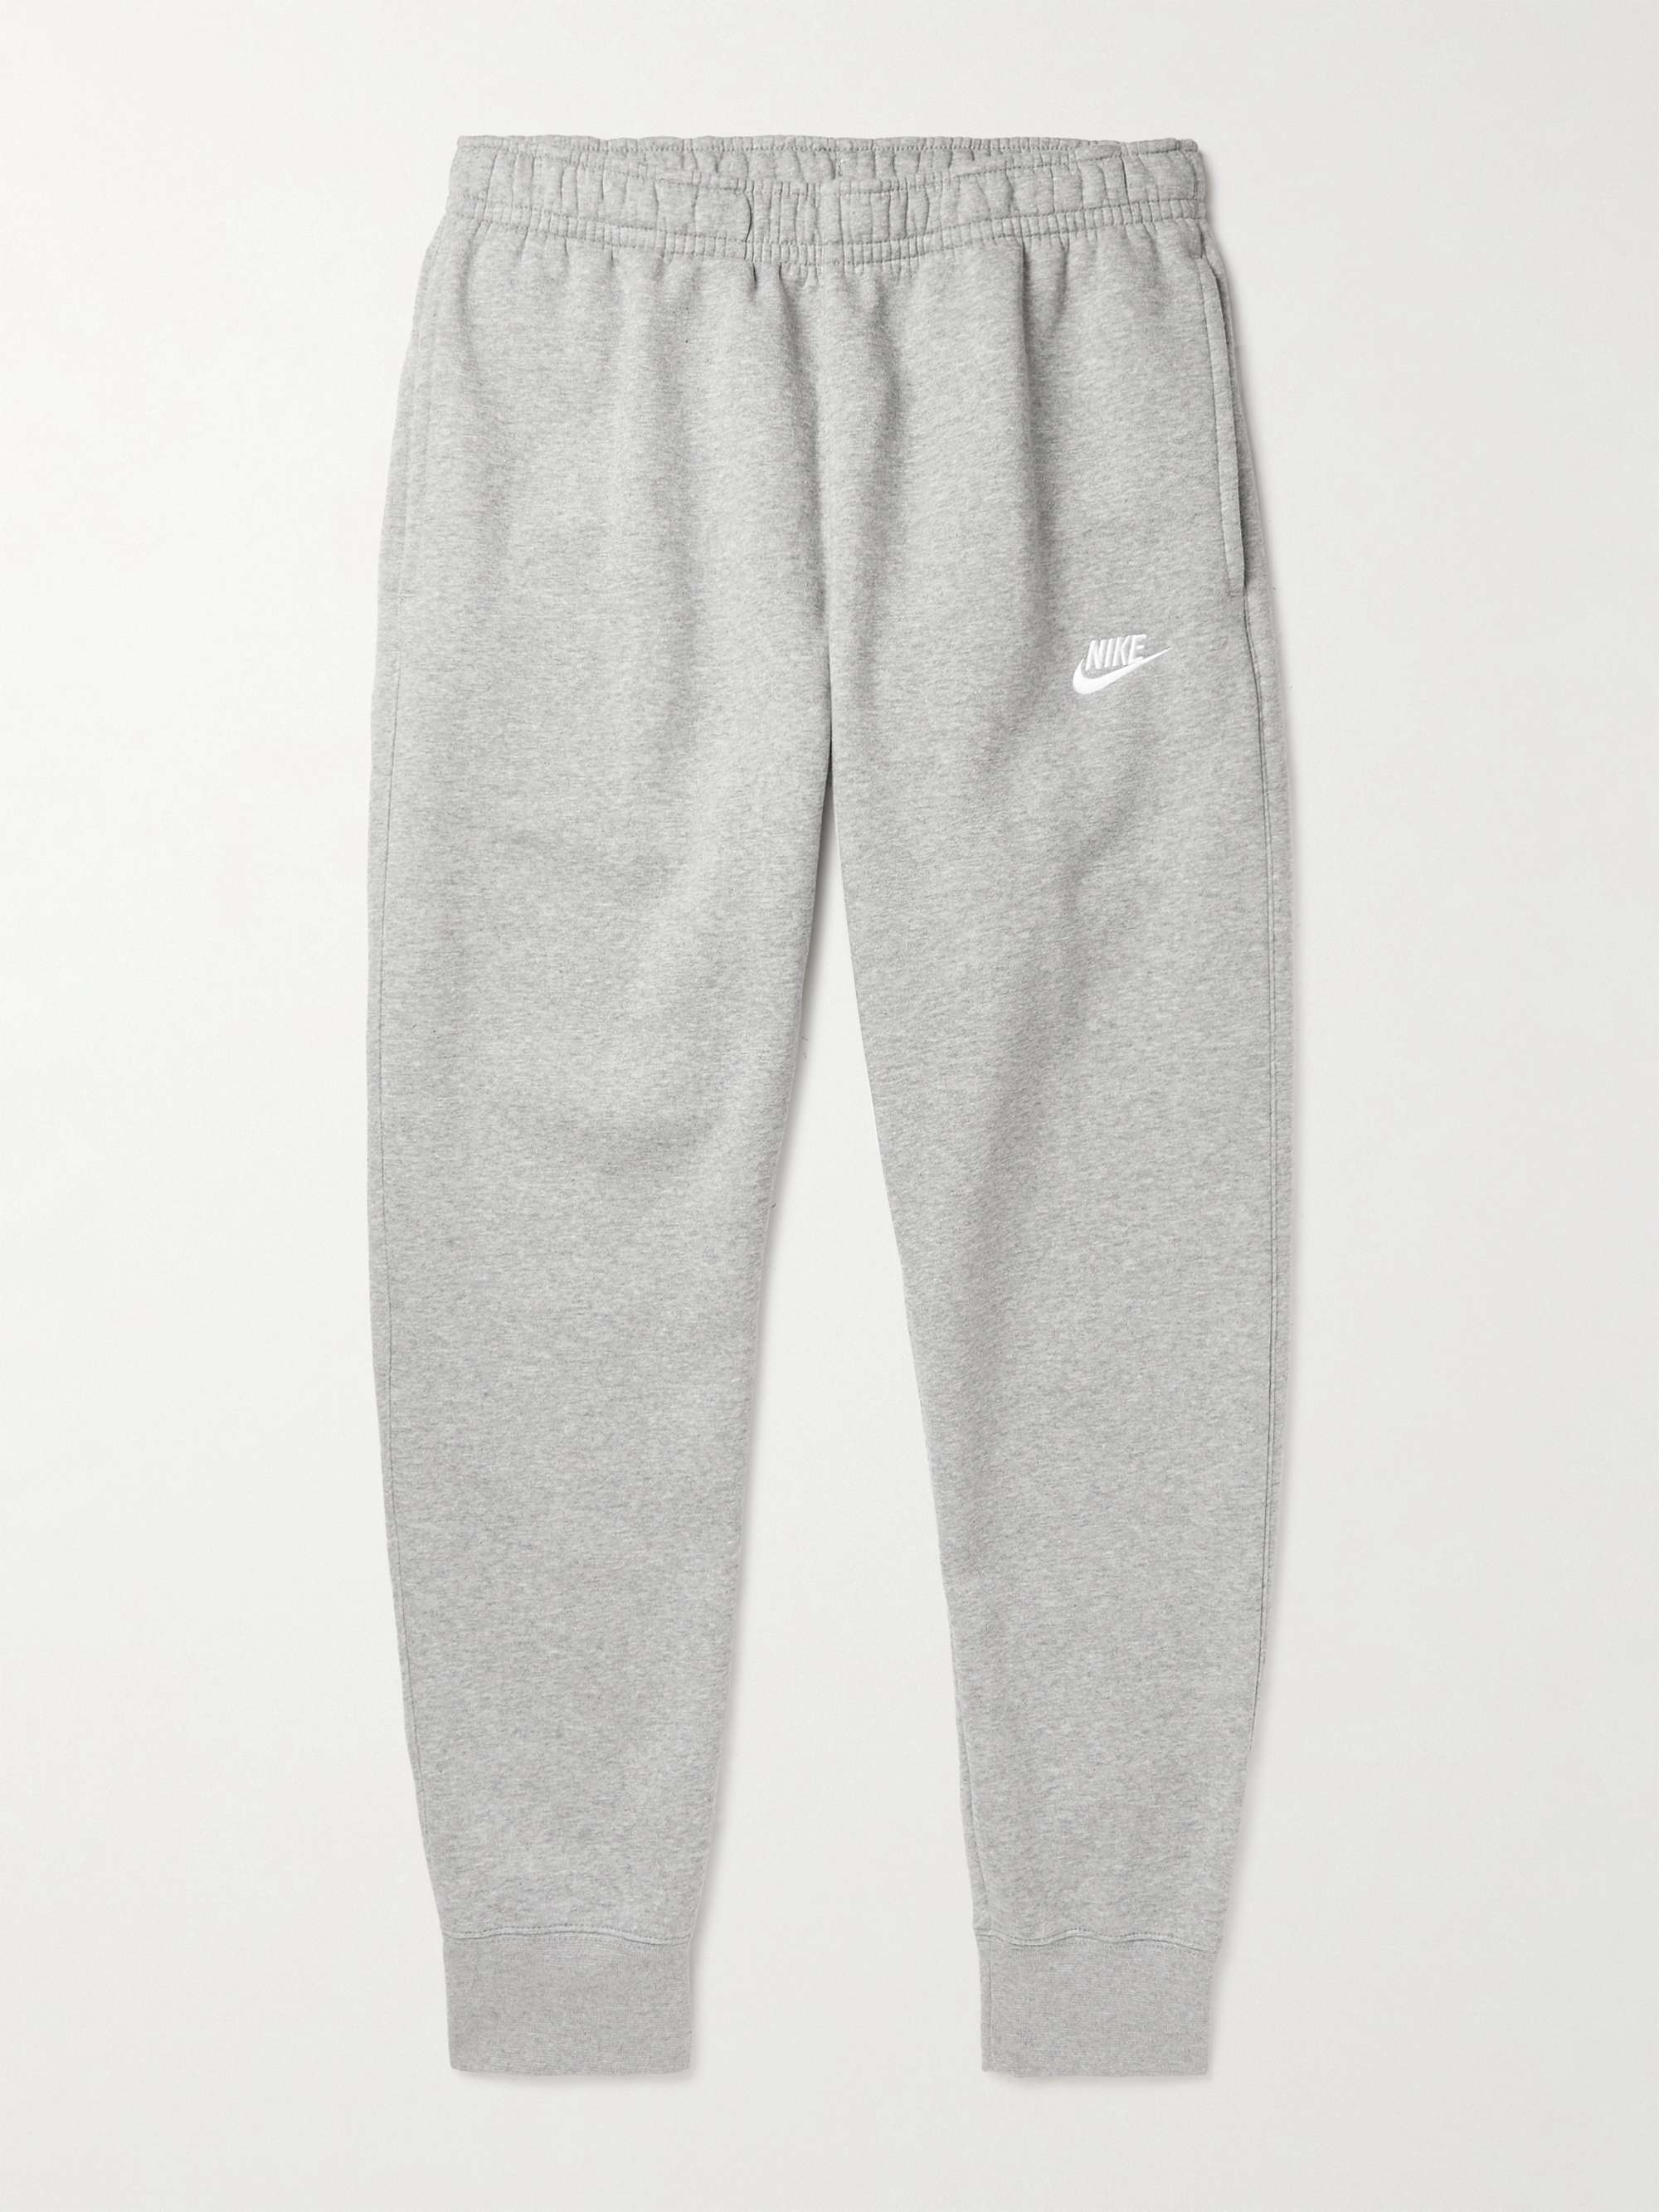 NSW Tapered Cotton-Blend Jersey Sweatpants